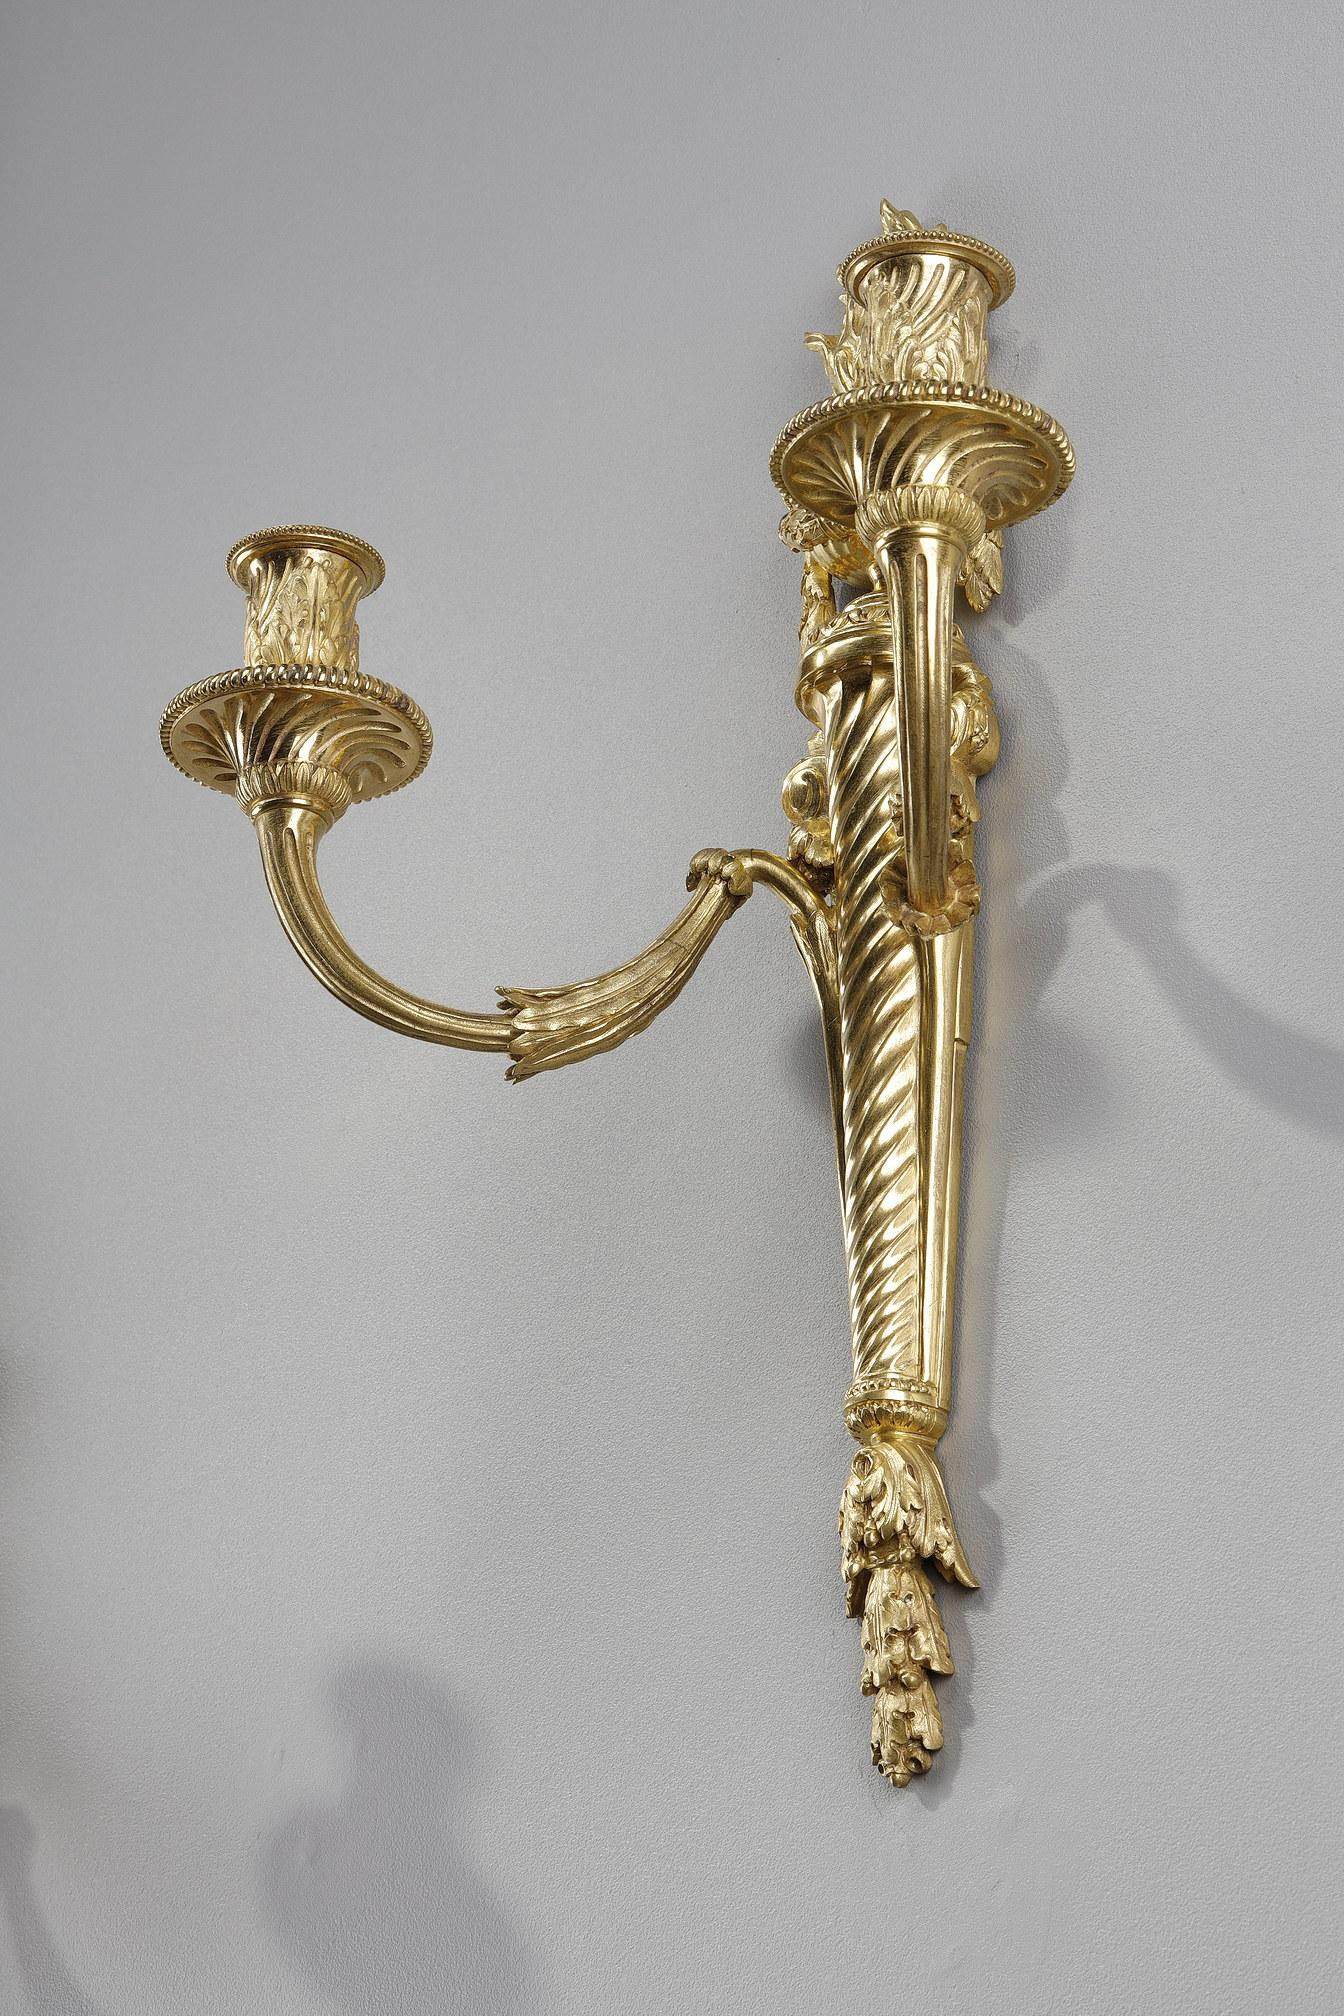 Gilt Pair of Ormulu Sconces in Louis XVI Style For Sale